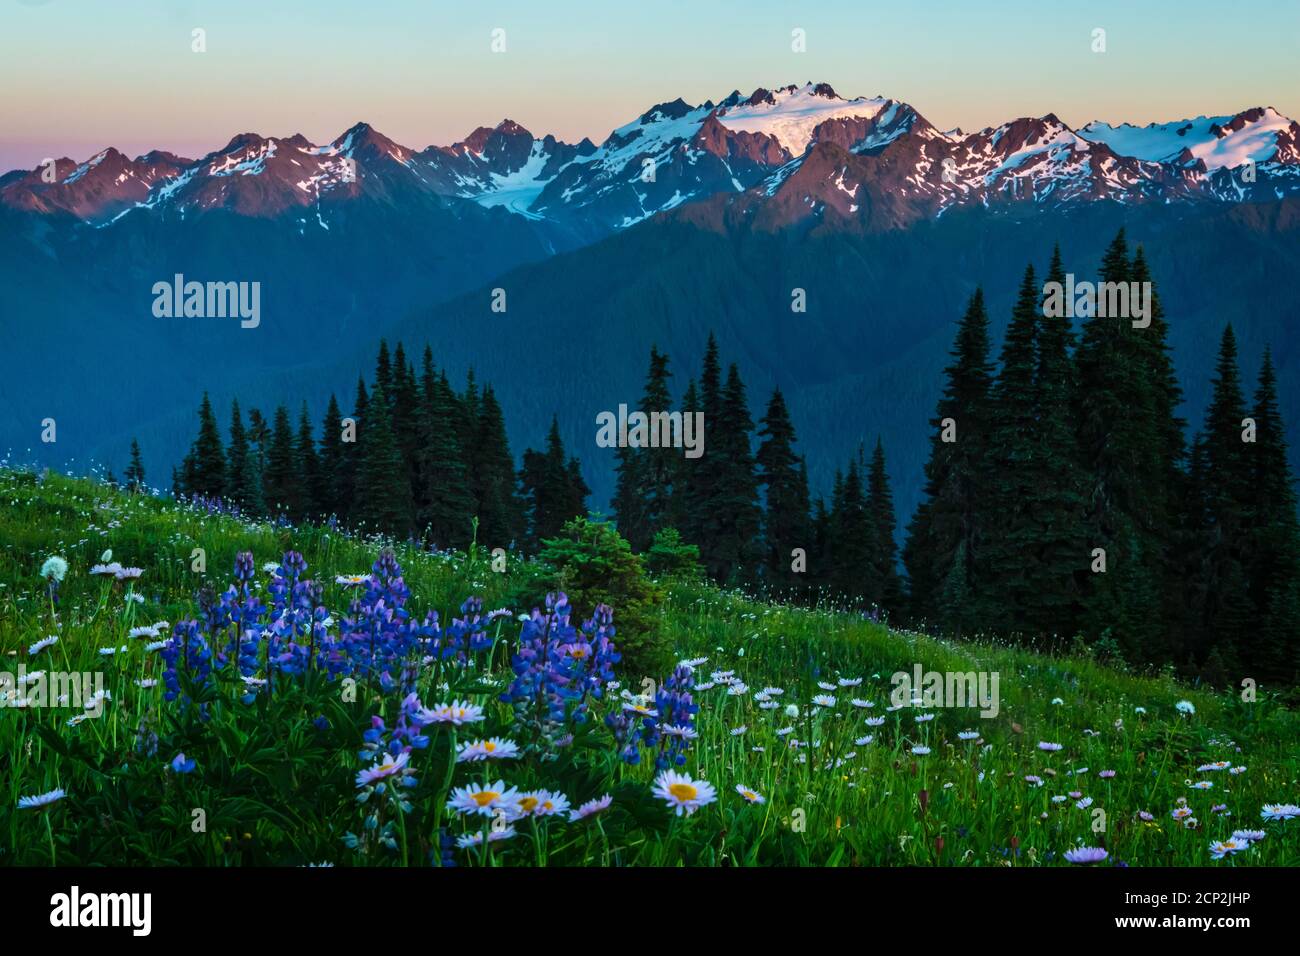 Mount Olympus above lupine and aster flowers on High Divide, Olympic National Park, Washington, USA. Stock Photo